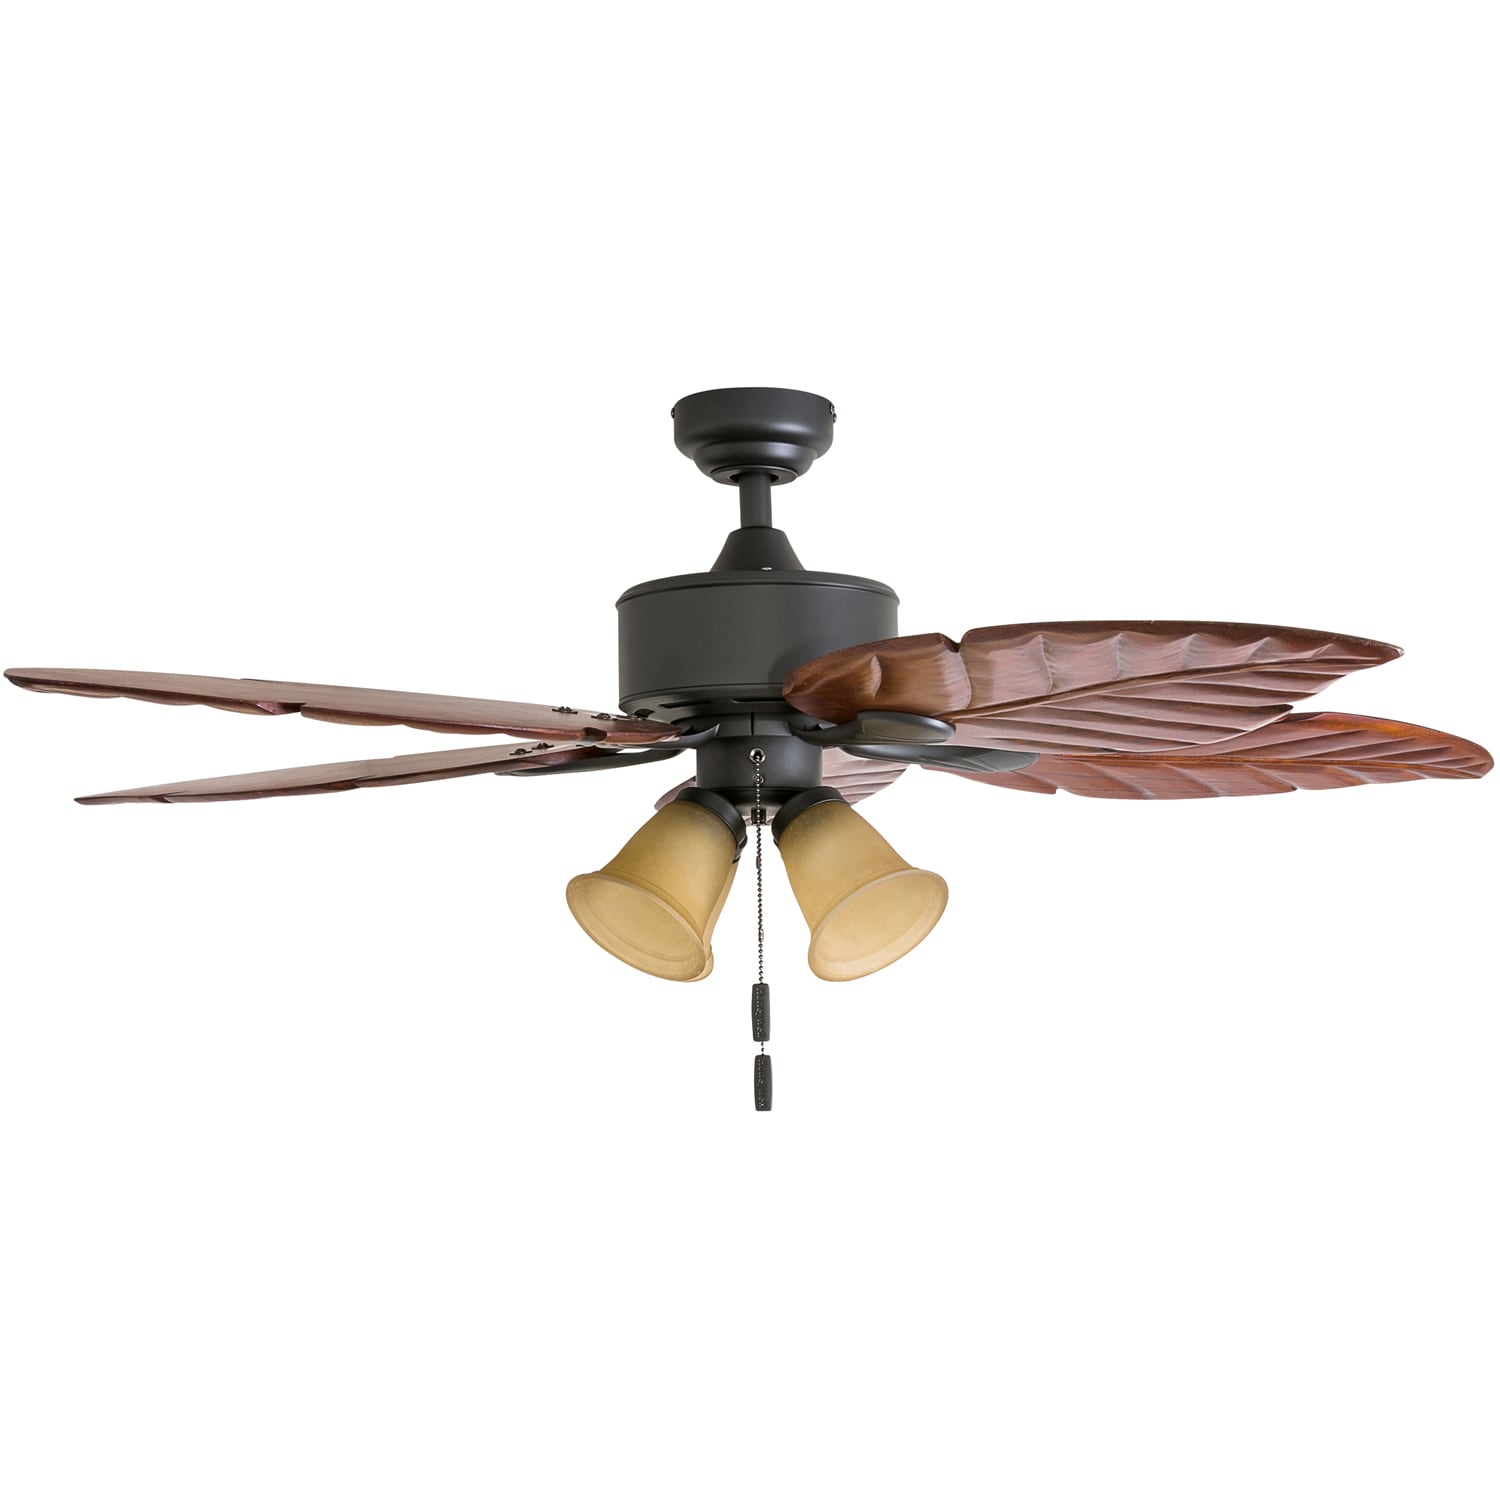 52" Prominence Home Royal Palm Tropical Four Light LED Ceiling Fan RC Bronze